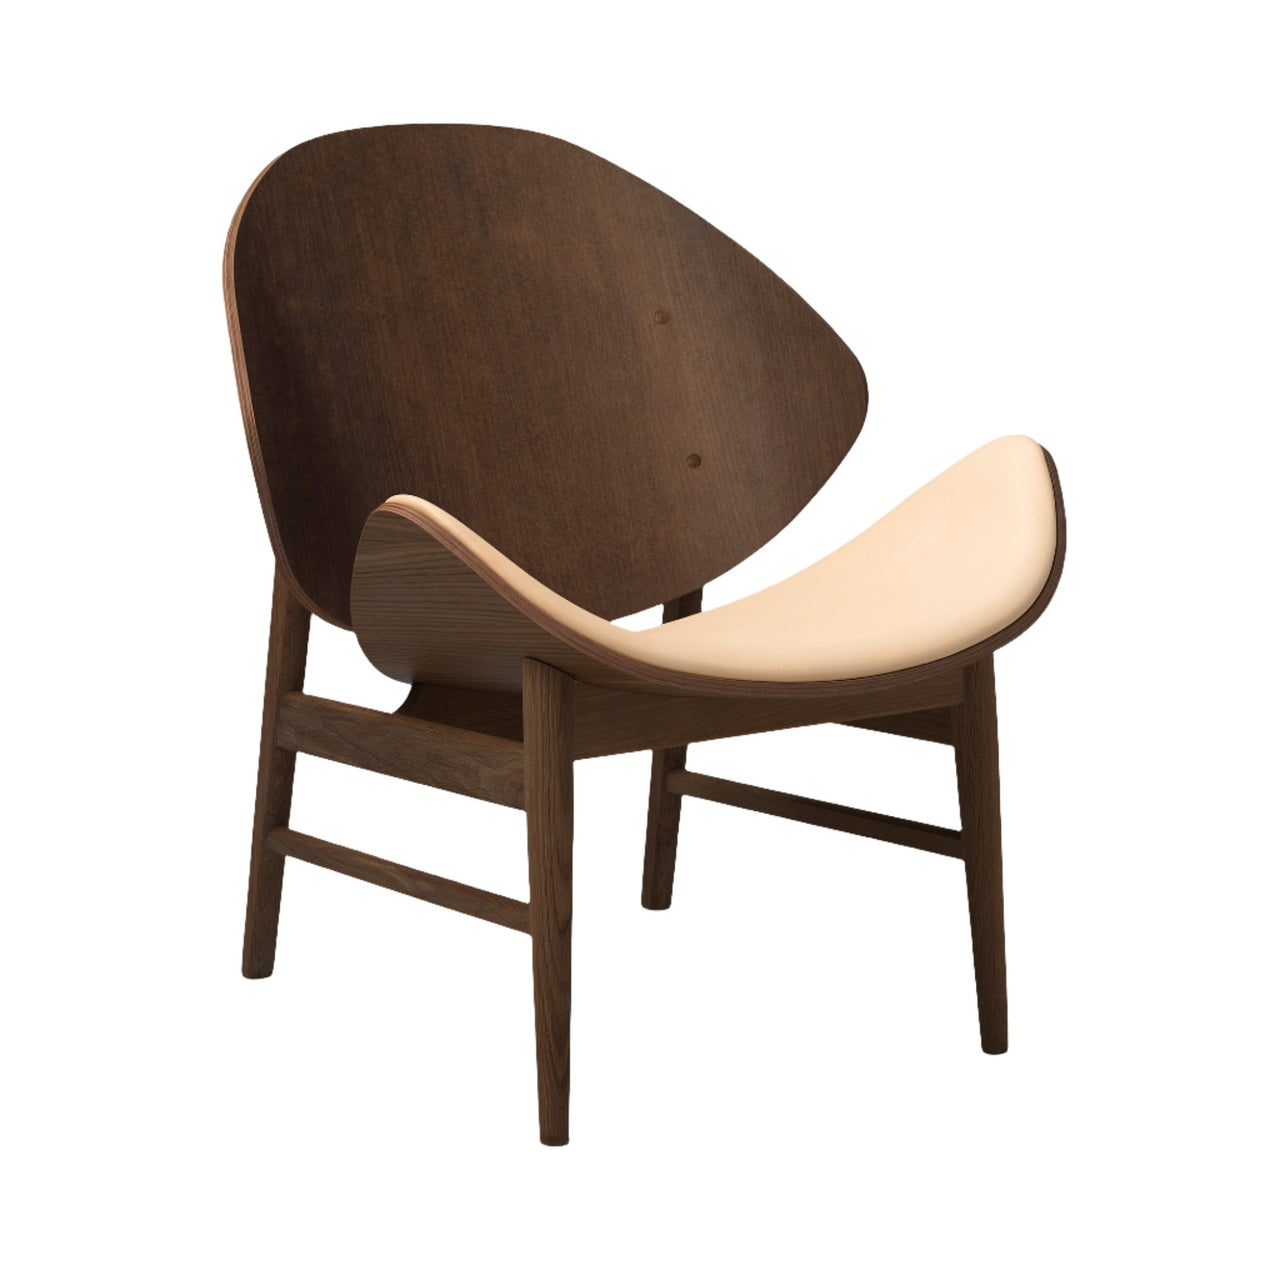 The Orange Lounge Chair: Seat Upholstered + Smoked Oak